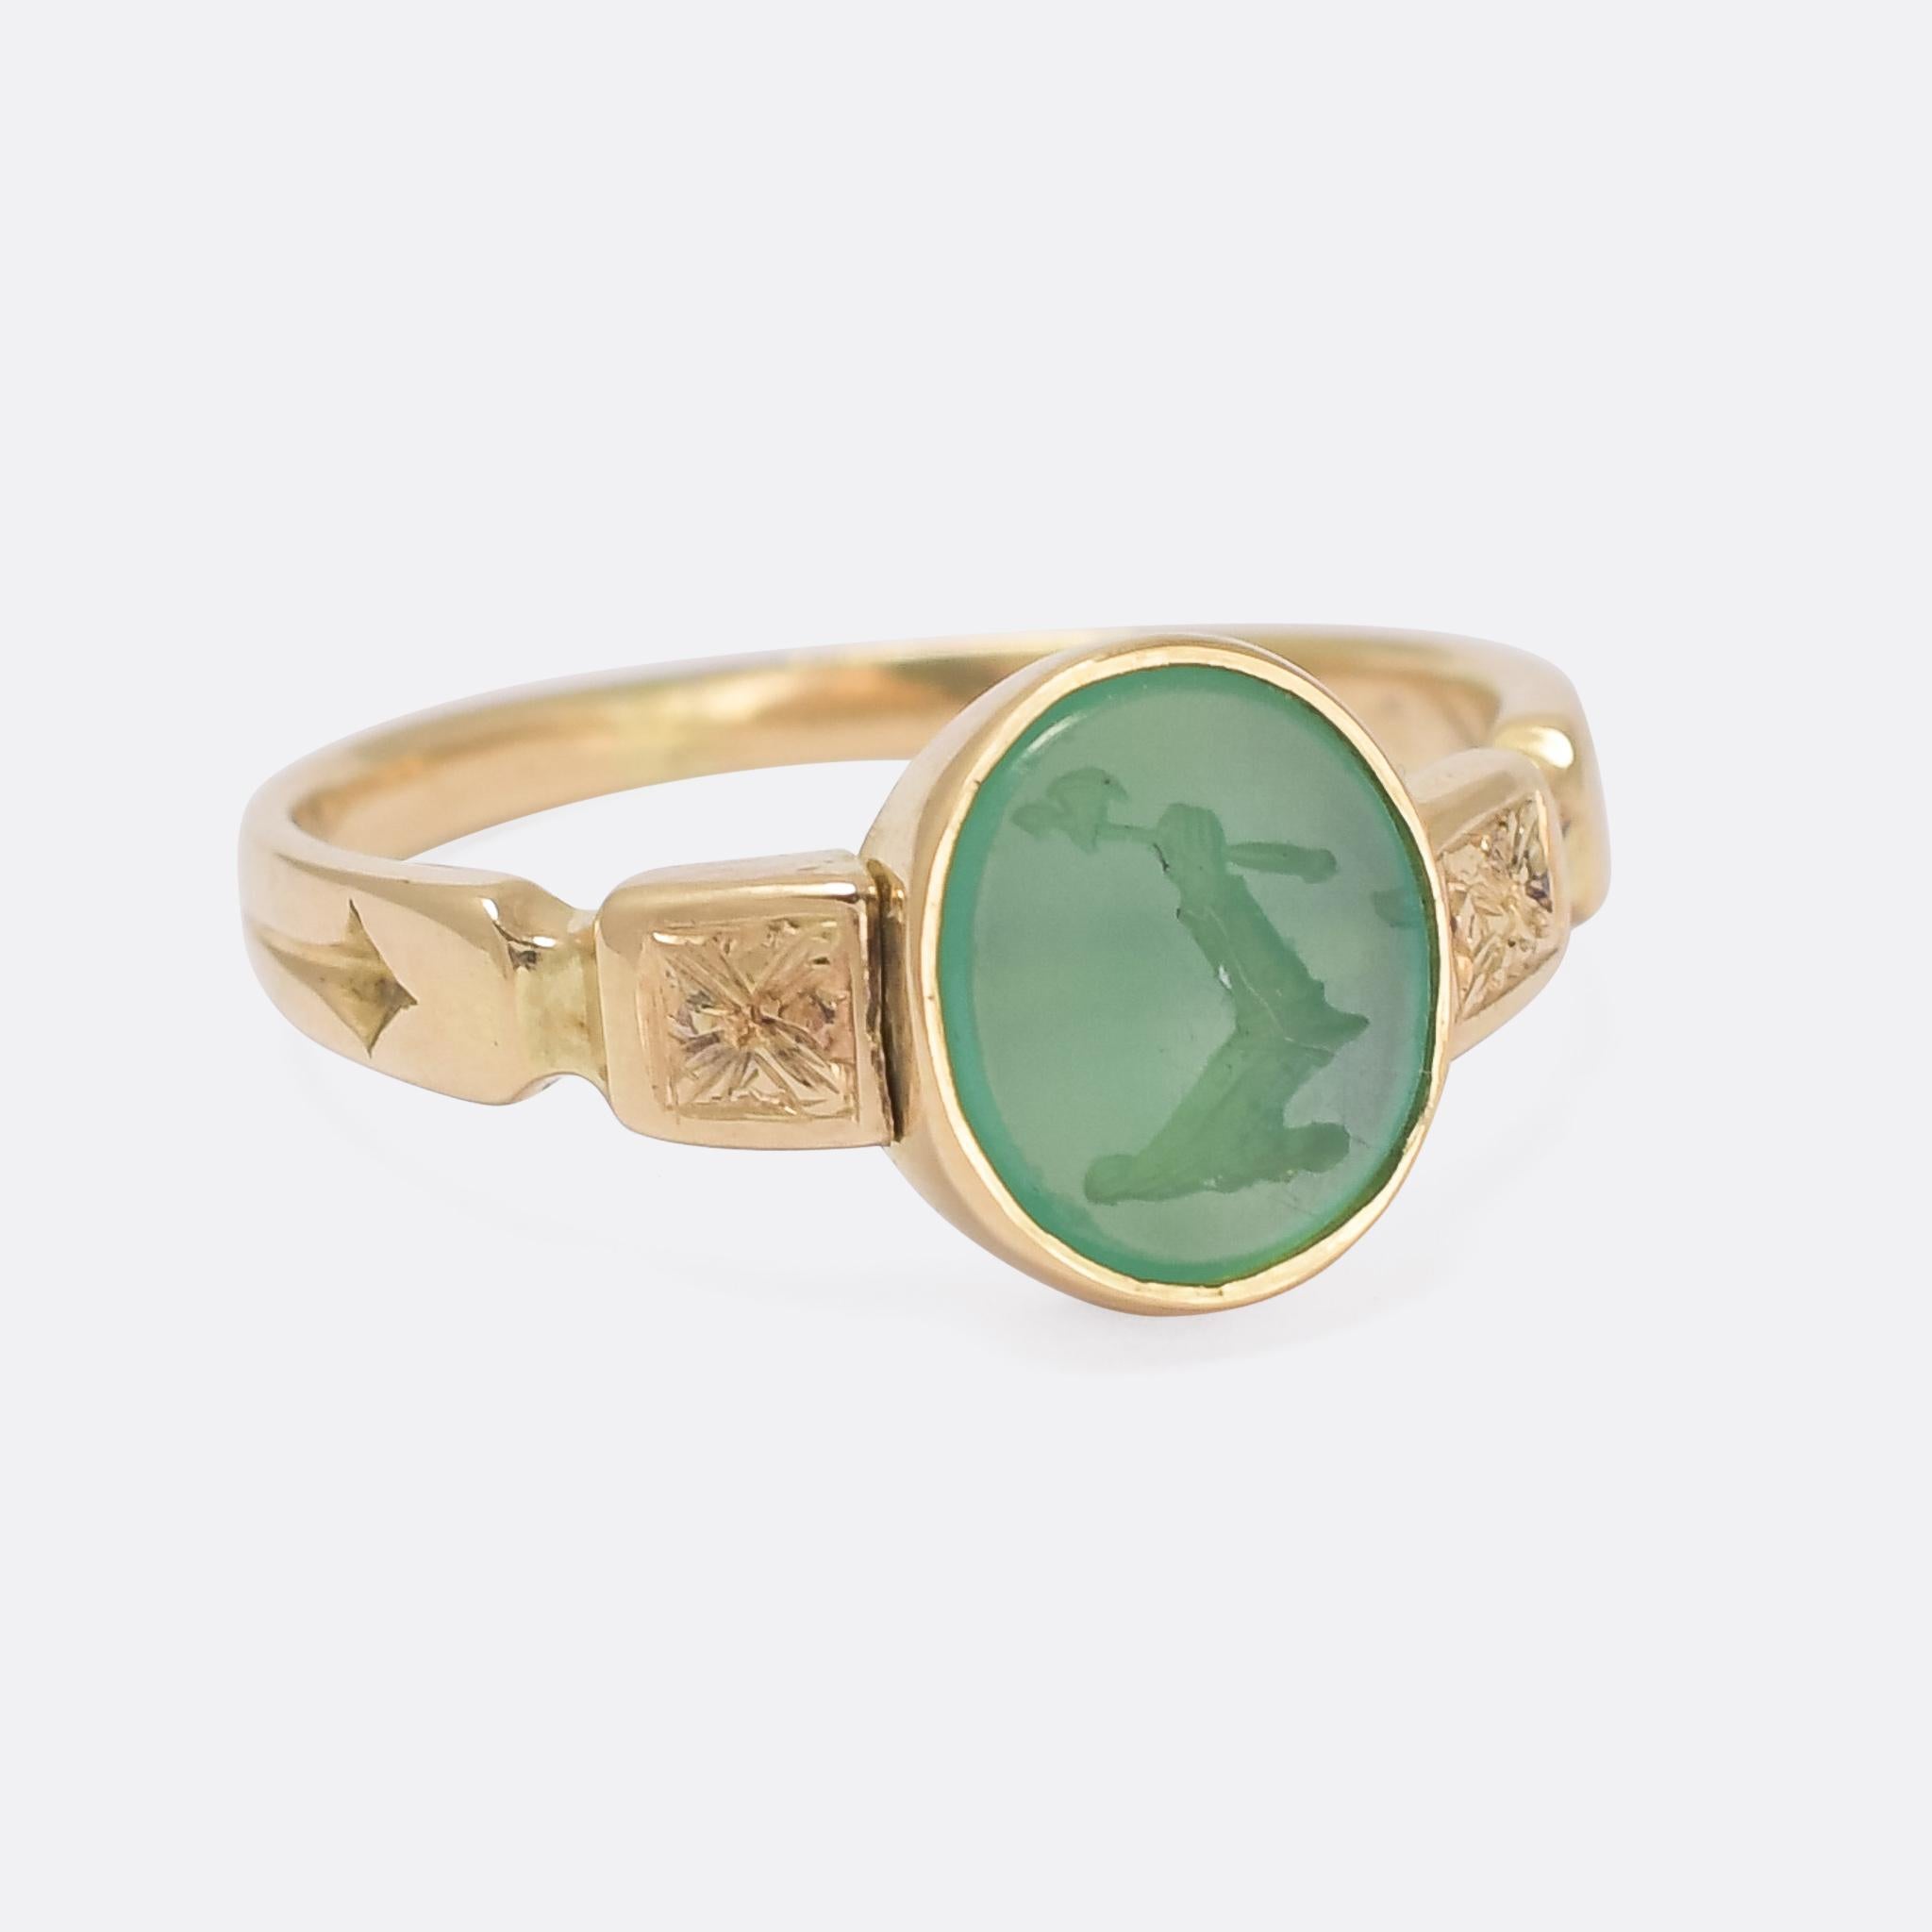 A cool Victorian signet ring set with an intaglio carved green agate heraldic crest depicting an outstretched arm, in full armour, holding a battle axe. The reverse has been reverse carved with the Latin words NON IMMEMOR, or 